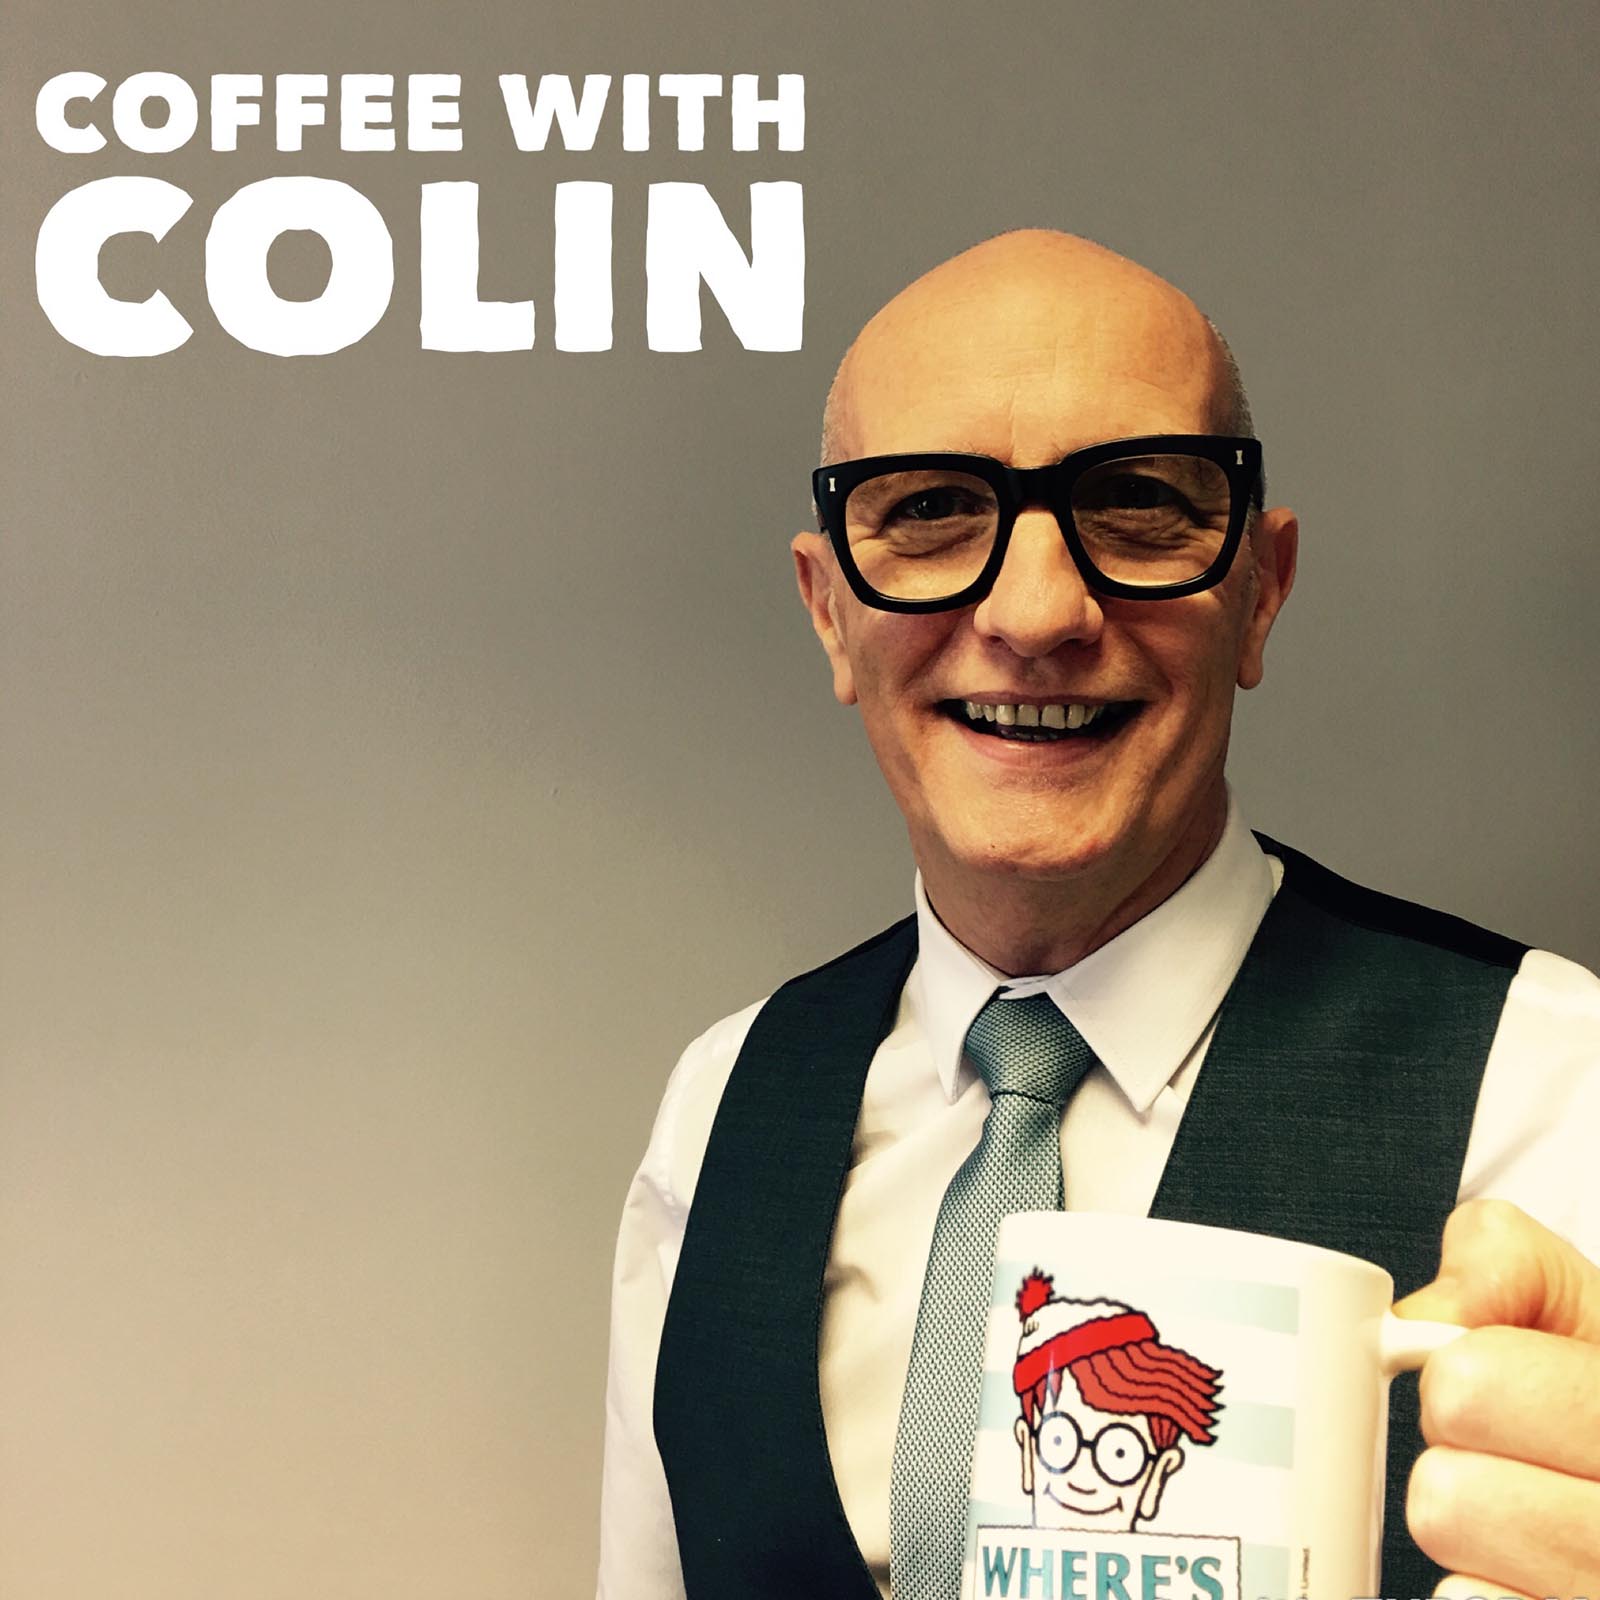 ENNISKILLEN - HAVE A COFFEE WITH COLIN ON 13 DECEMBER